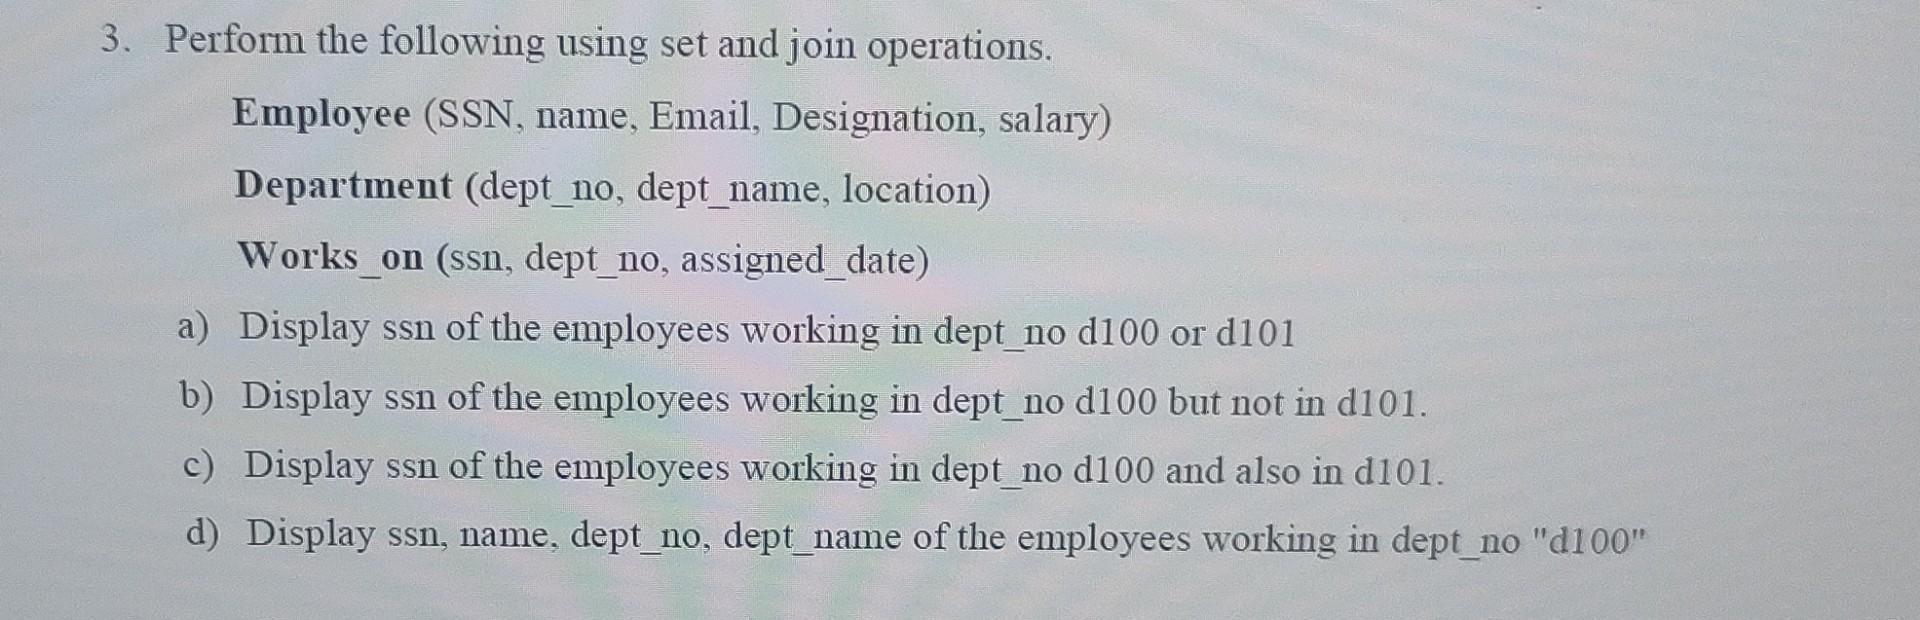 3. Perform the following using set and join operations. Employee (SSN, name, Email, Designation, salary)